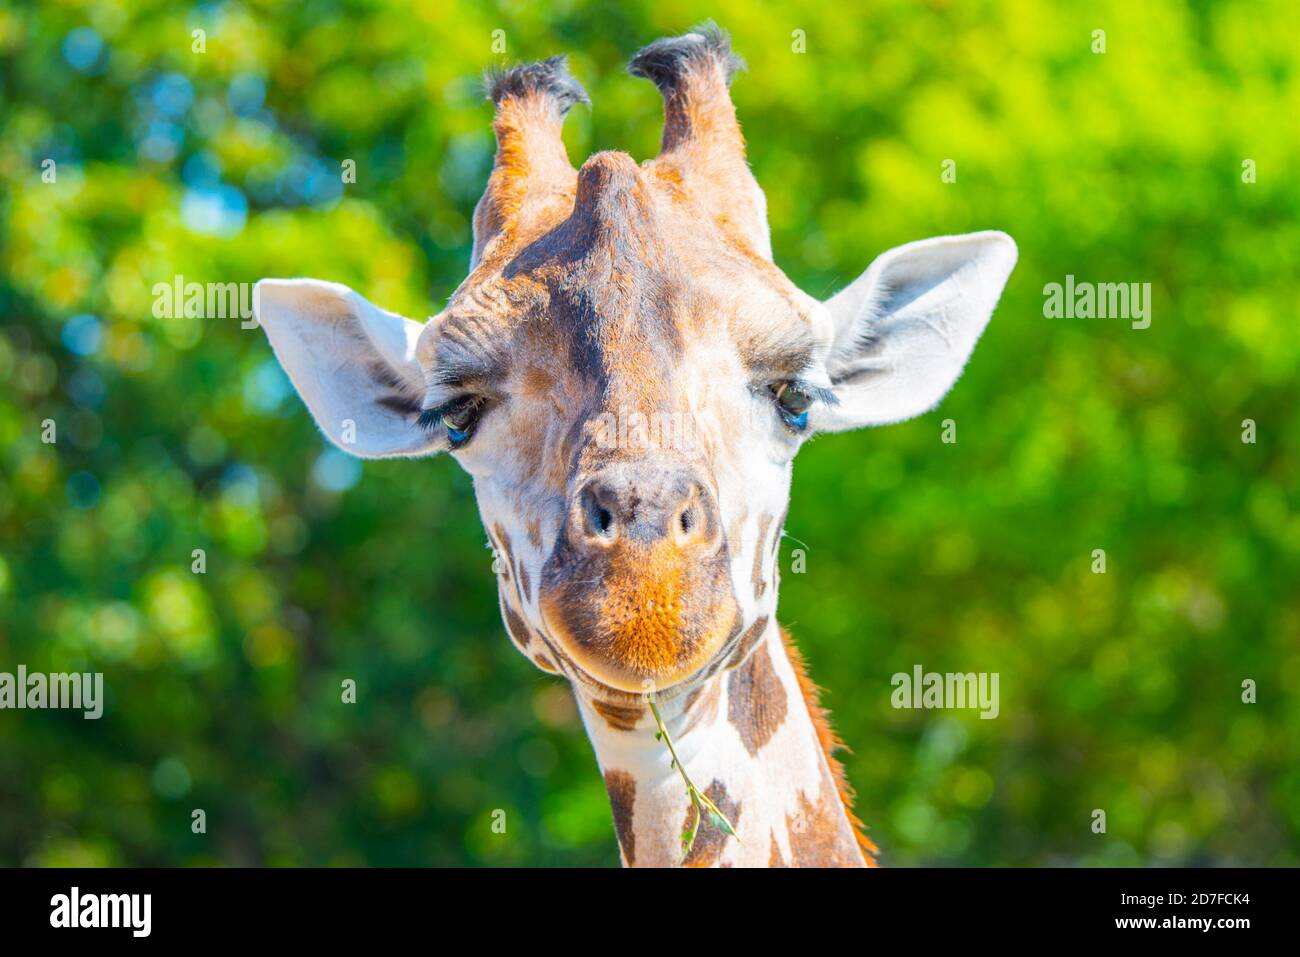 Giraffe head close-up. Deatiled view of african wildlife. Stock Photo